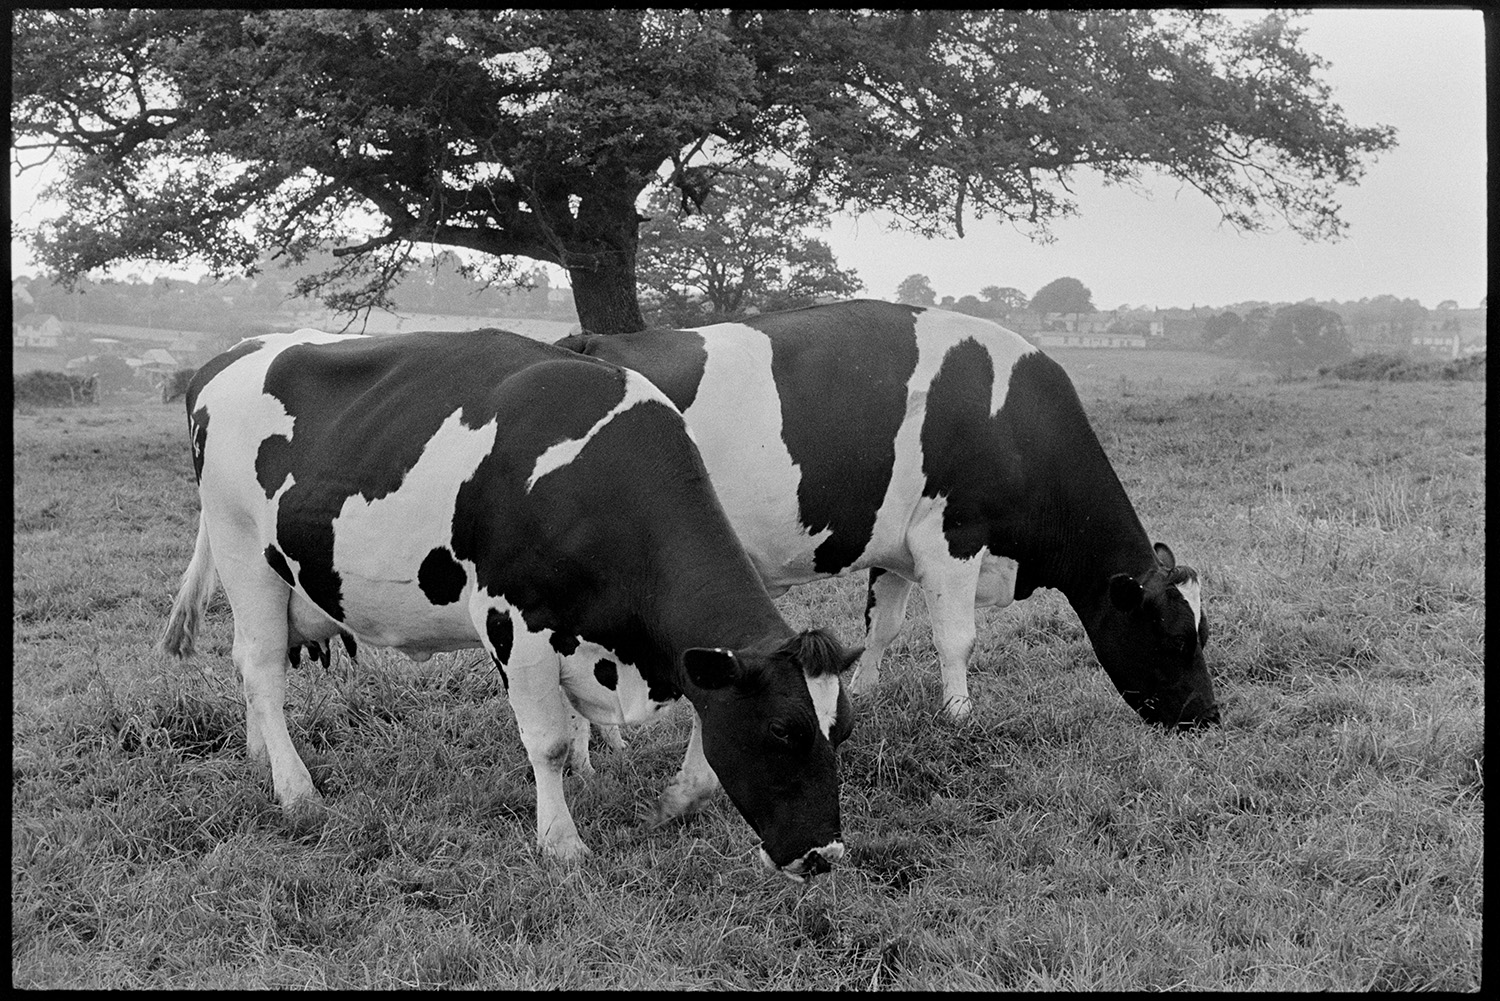 Cows in field with oak tree. 
[Two cows grazing in a field by an oak tree at Cleave, Dolton.]